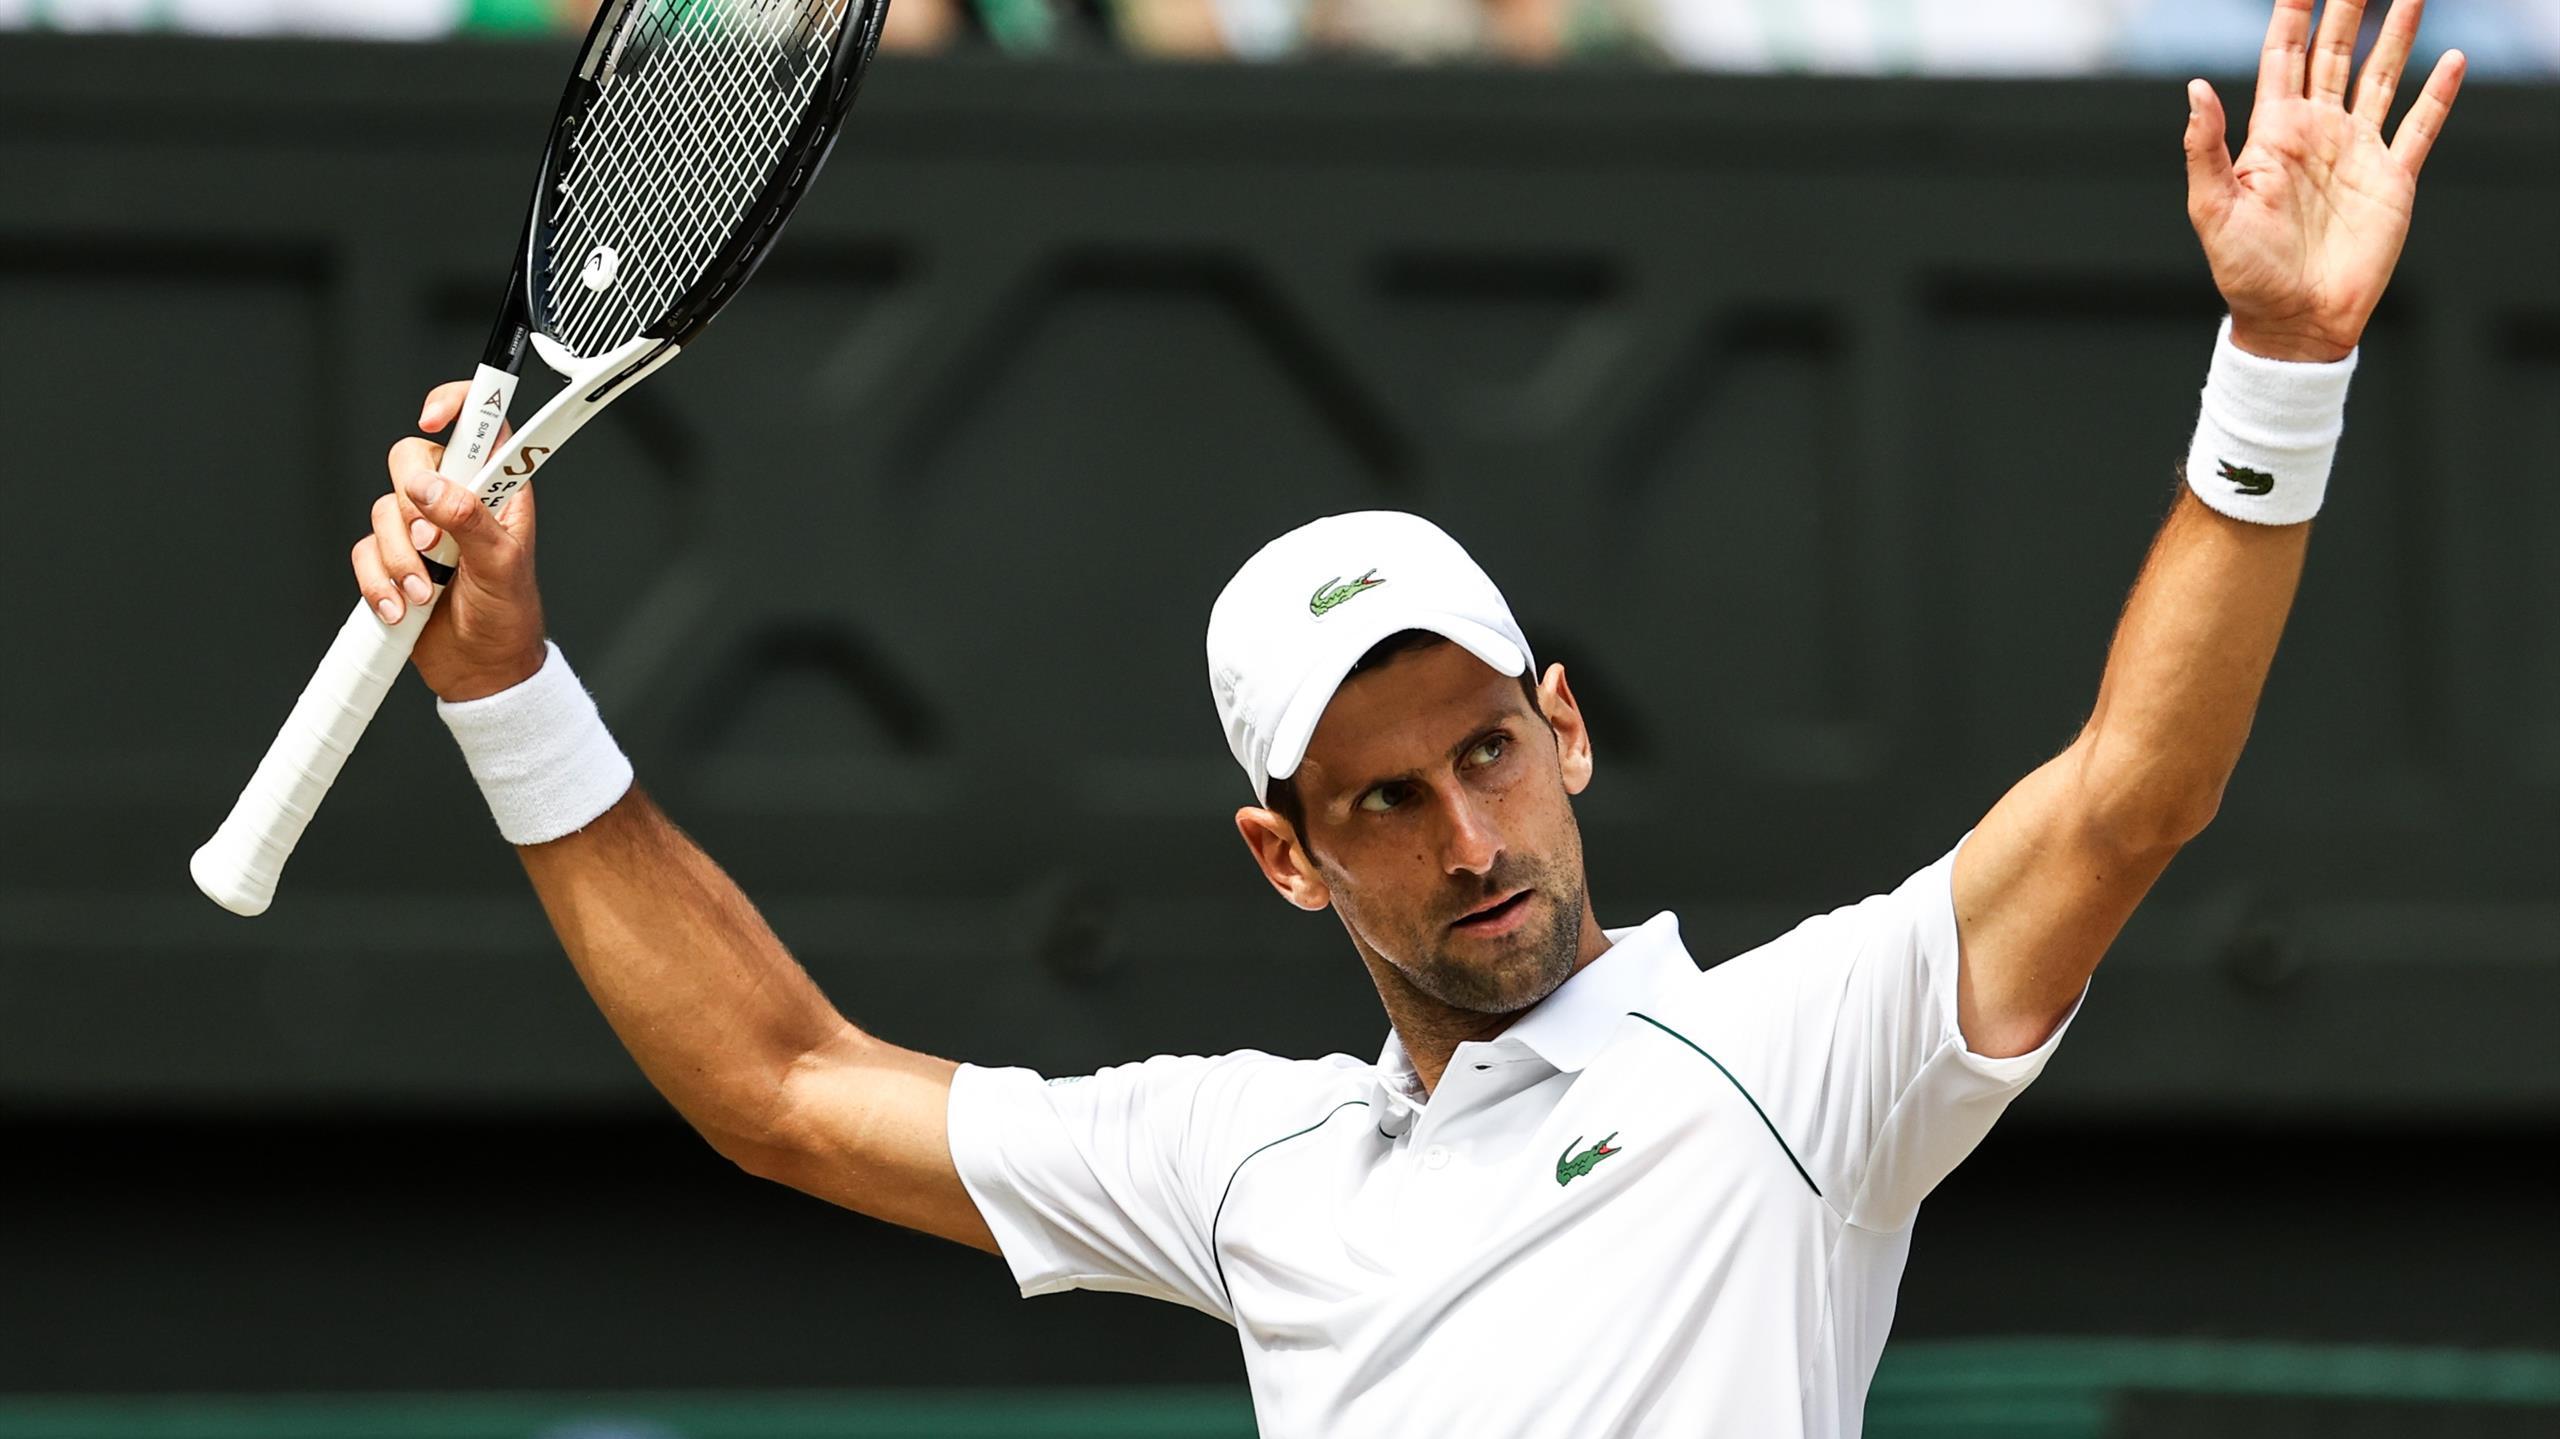 Wimbledon Day Order Of Play And Schedule When Are Novak